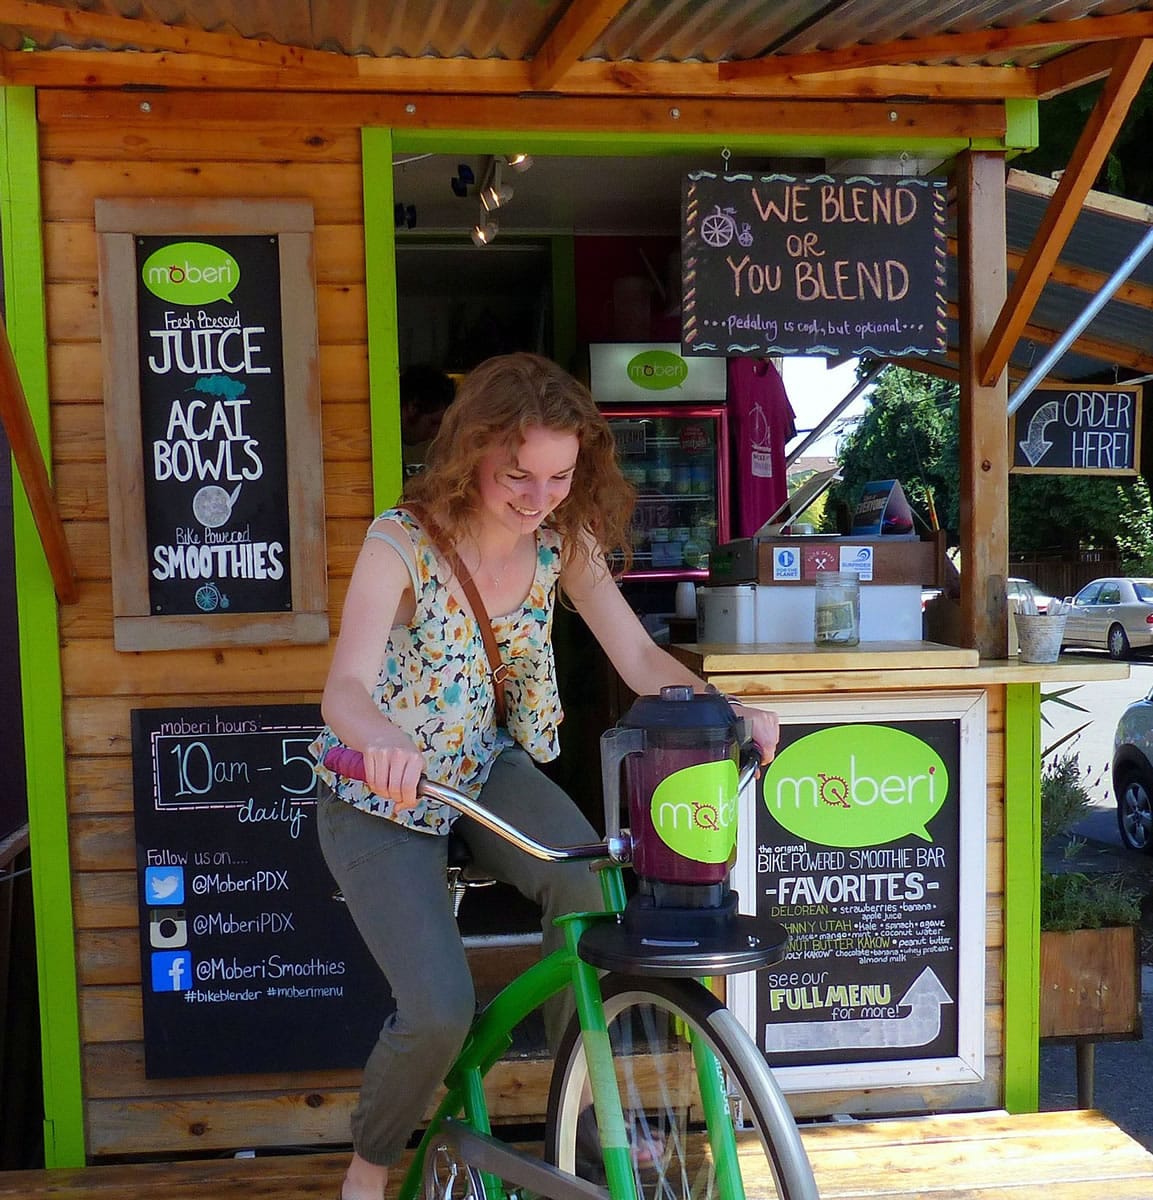 Carly Gray pedals to blend a Mr. Wonderful smoothie at the Moberi smoothie shack on Mississippi Avenue in Portland. &quot;We Blend or You Blend ...